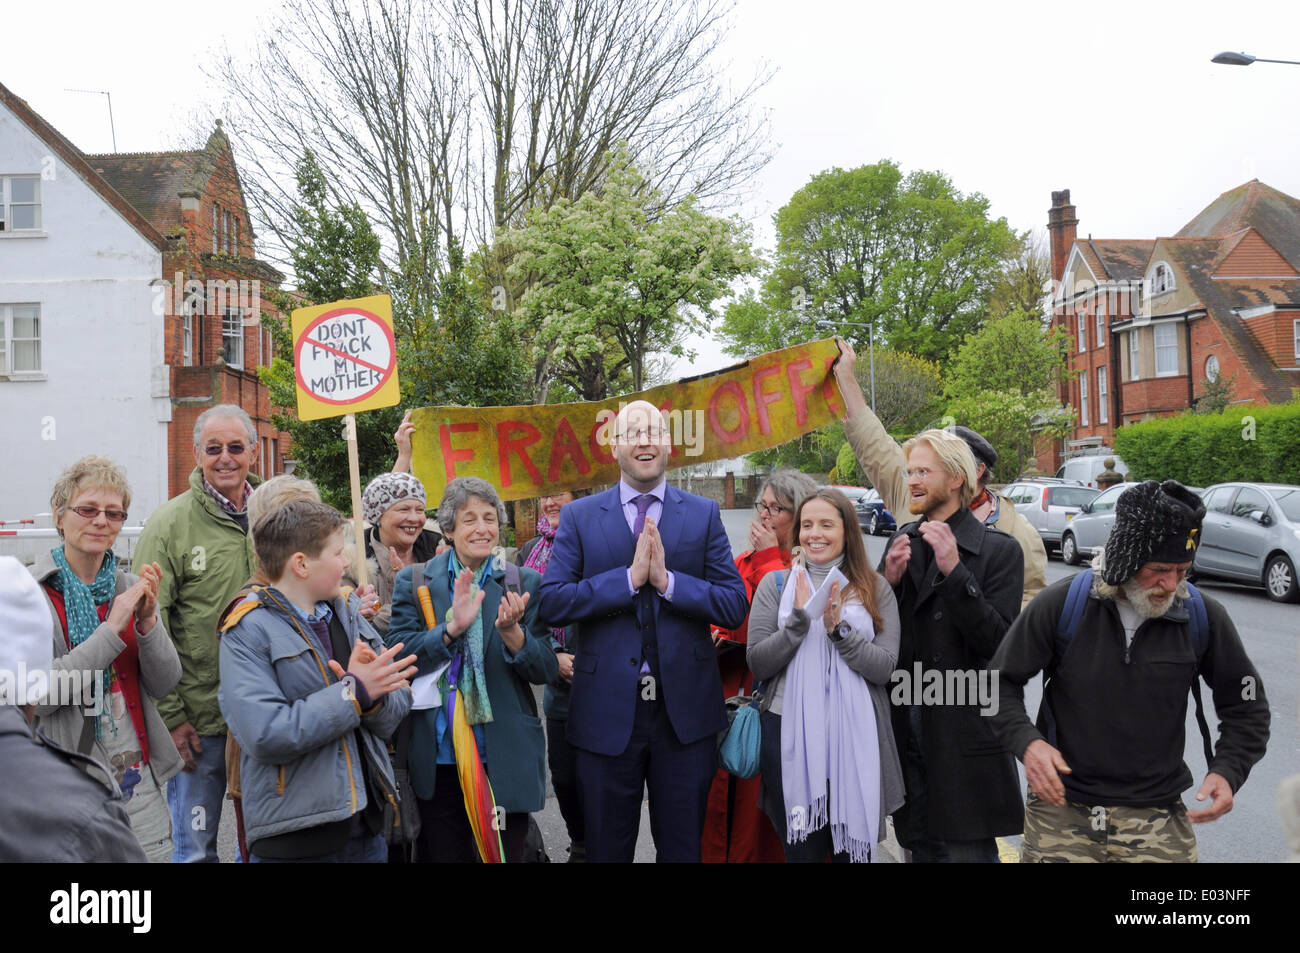 Eastbourne, East Sussex, UK.1 May 2014.Jubilant Simon Welsh with supporters outside Eastbourne Law Court acquitted of charge relating to his arrest at Anti Fracking demonstration in Balcombe last September. Simon was the only Balcombe resident arrested. More protests can now be expected at Cuadrillas Balcombe site as the company has been given permission by West Sussex County Council to continue work. Stock Photo